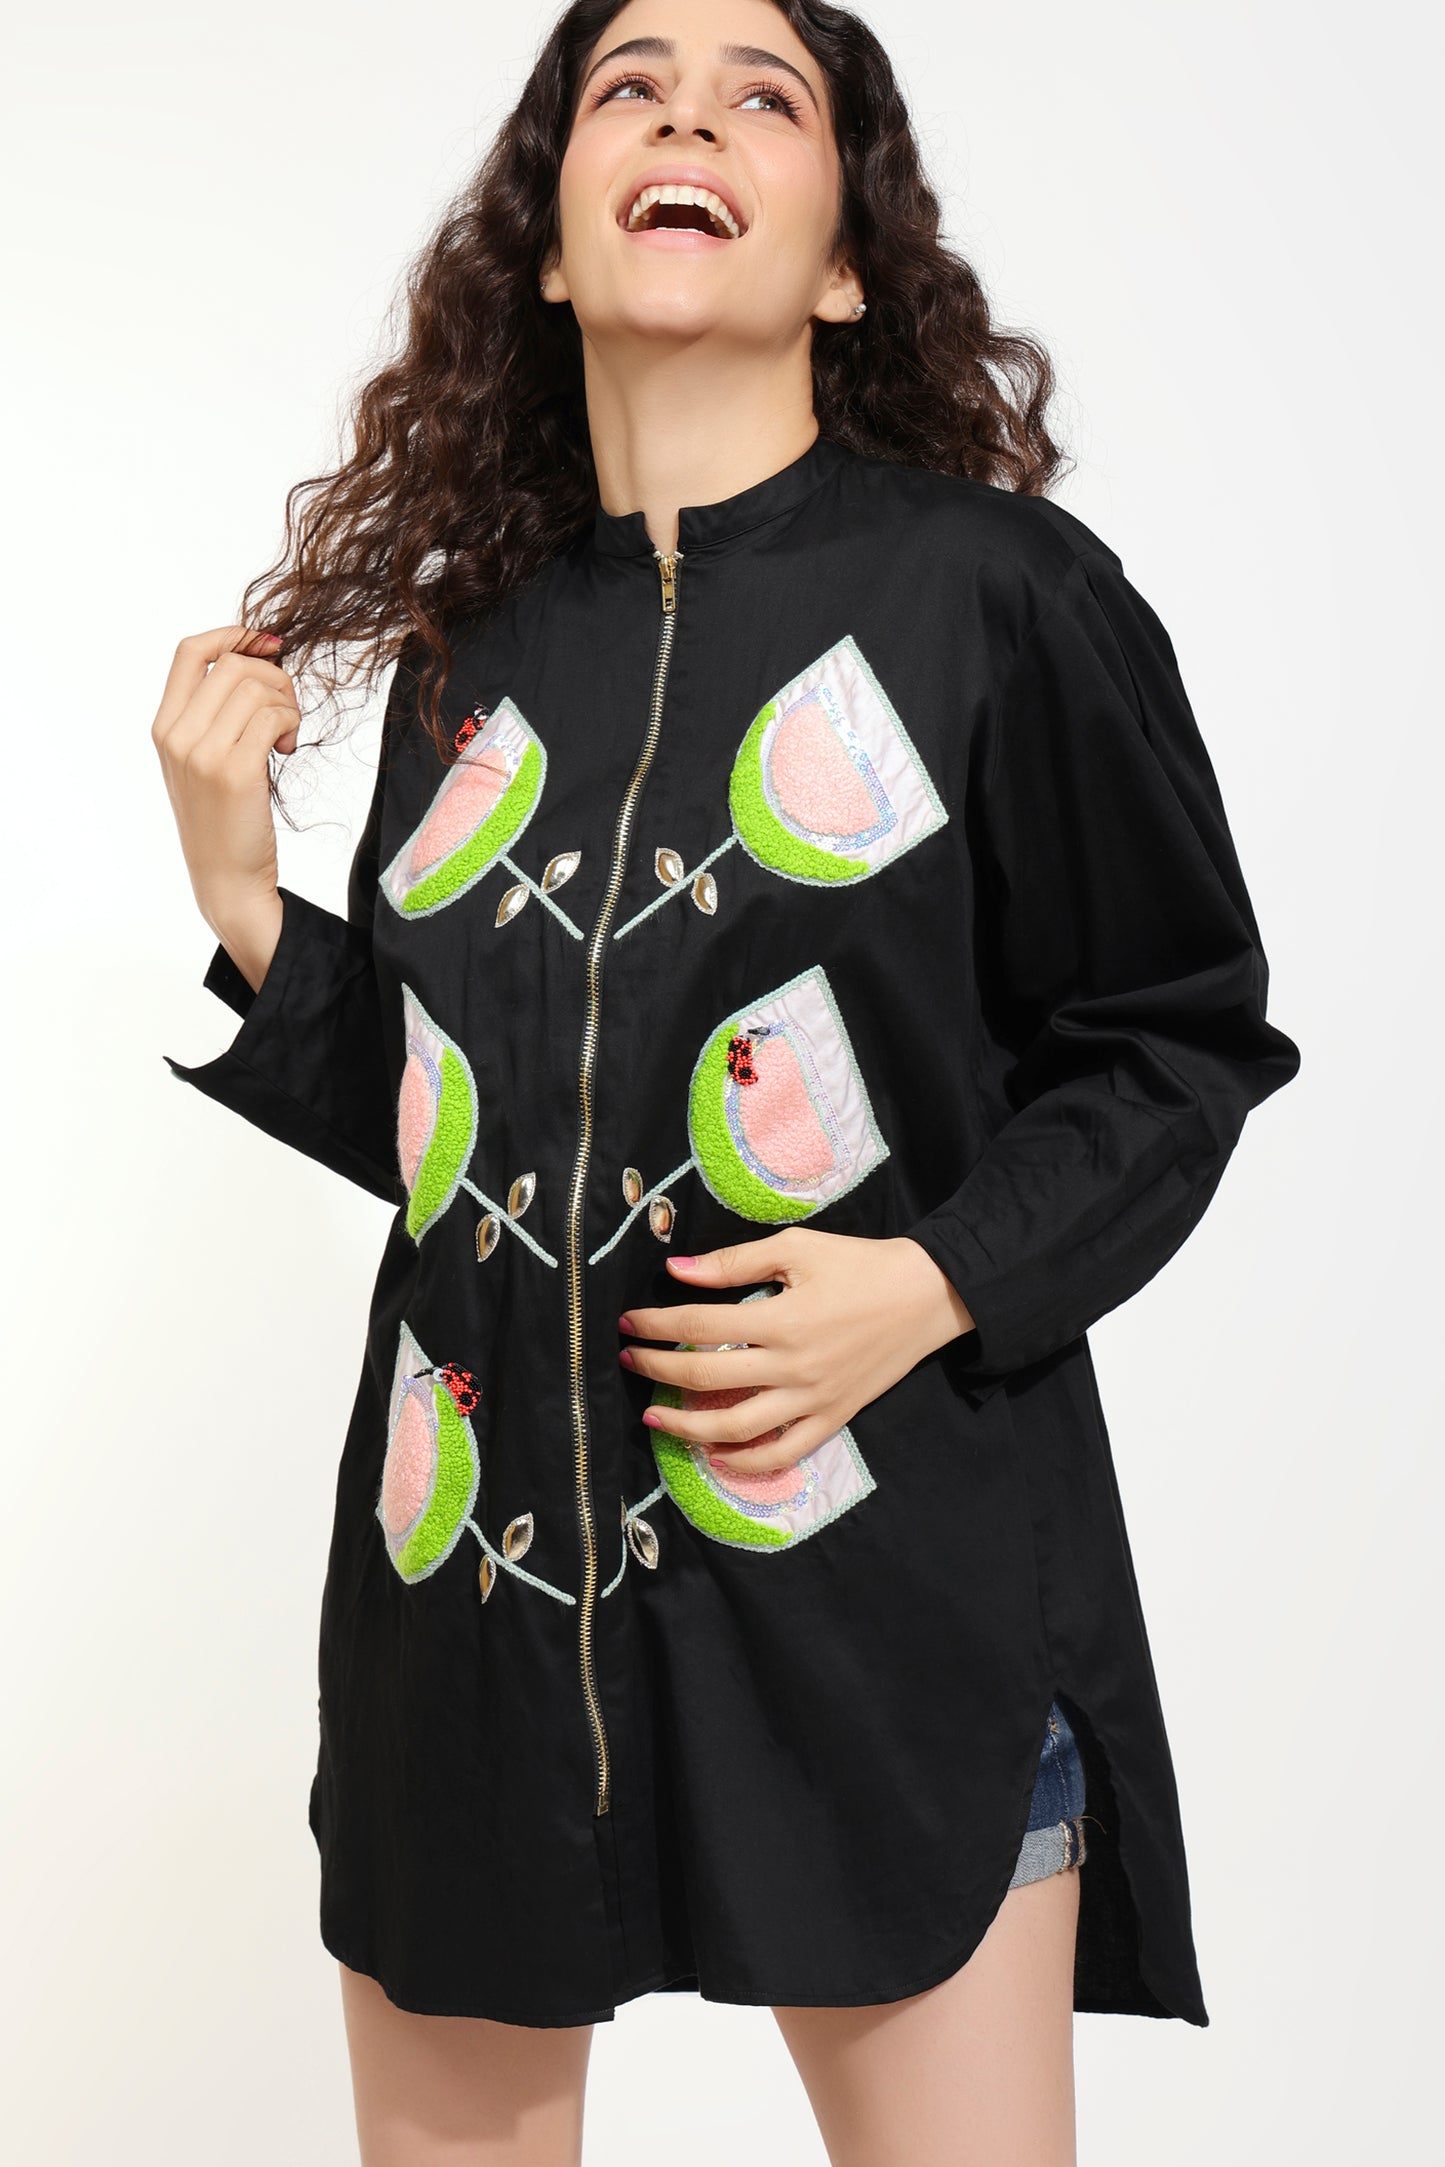 Bug Me Lady Embroidered Black Tunic